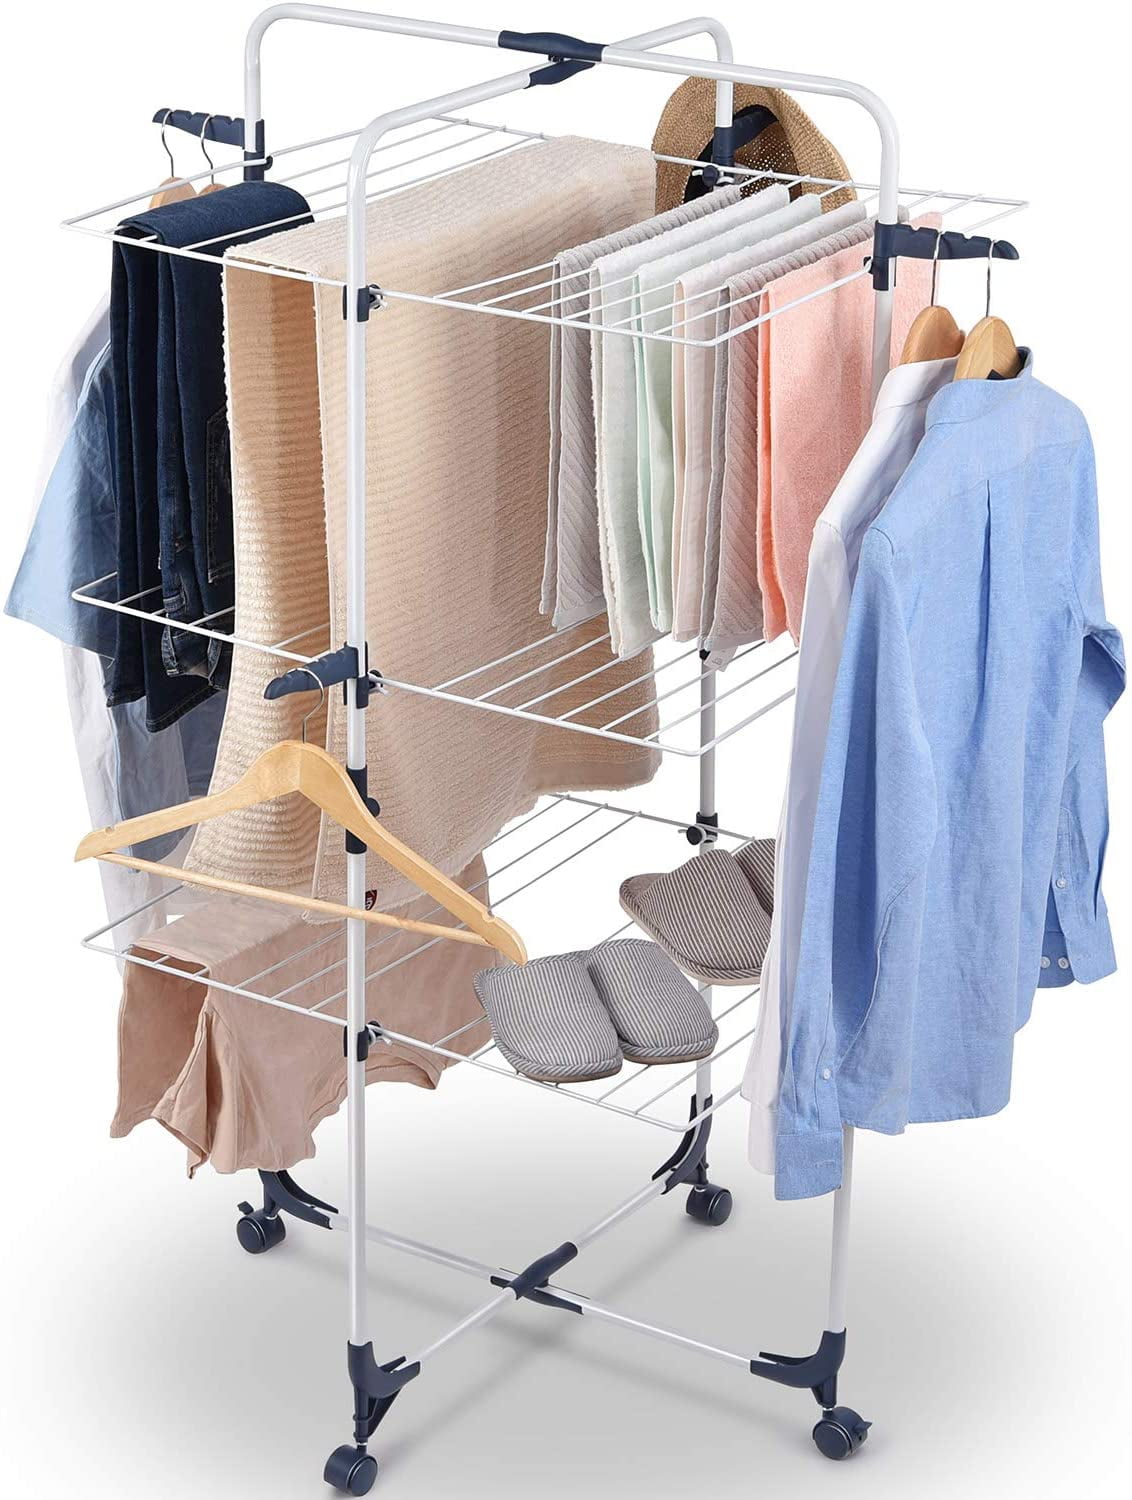 Clothes Drying Rack Laundry Stand Folding Hanger Indoor Dryer Storage travel 